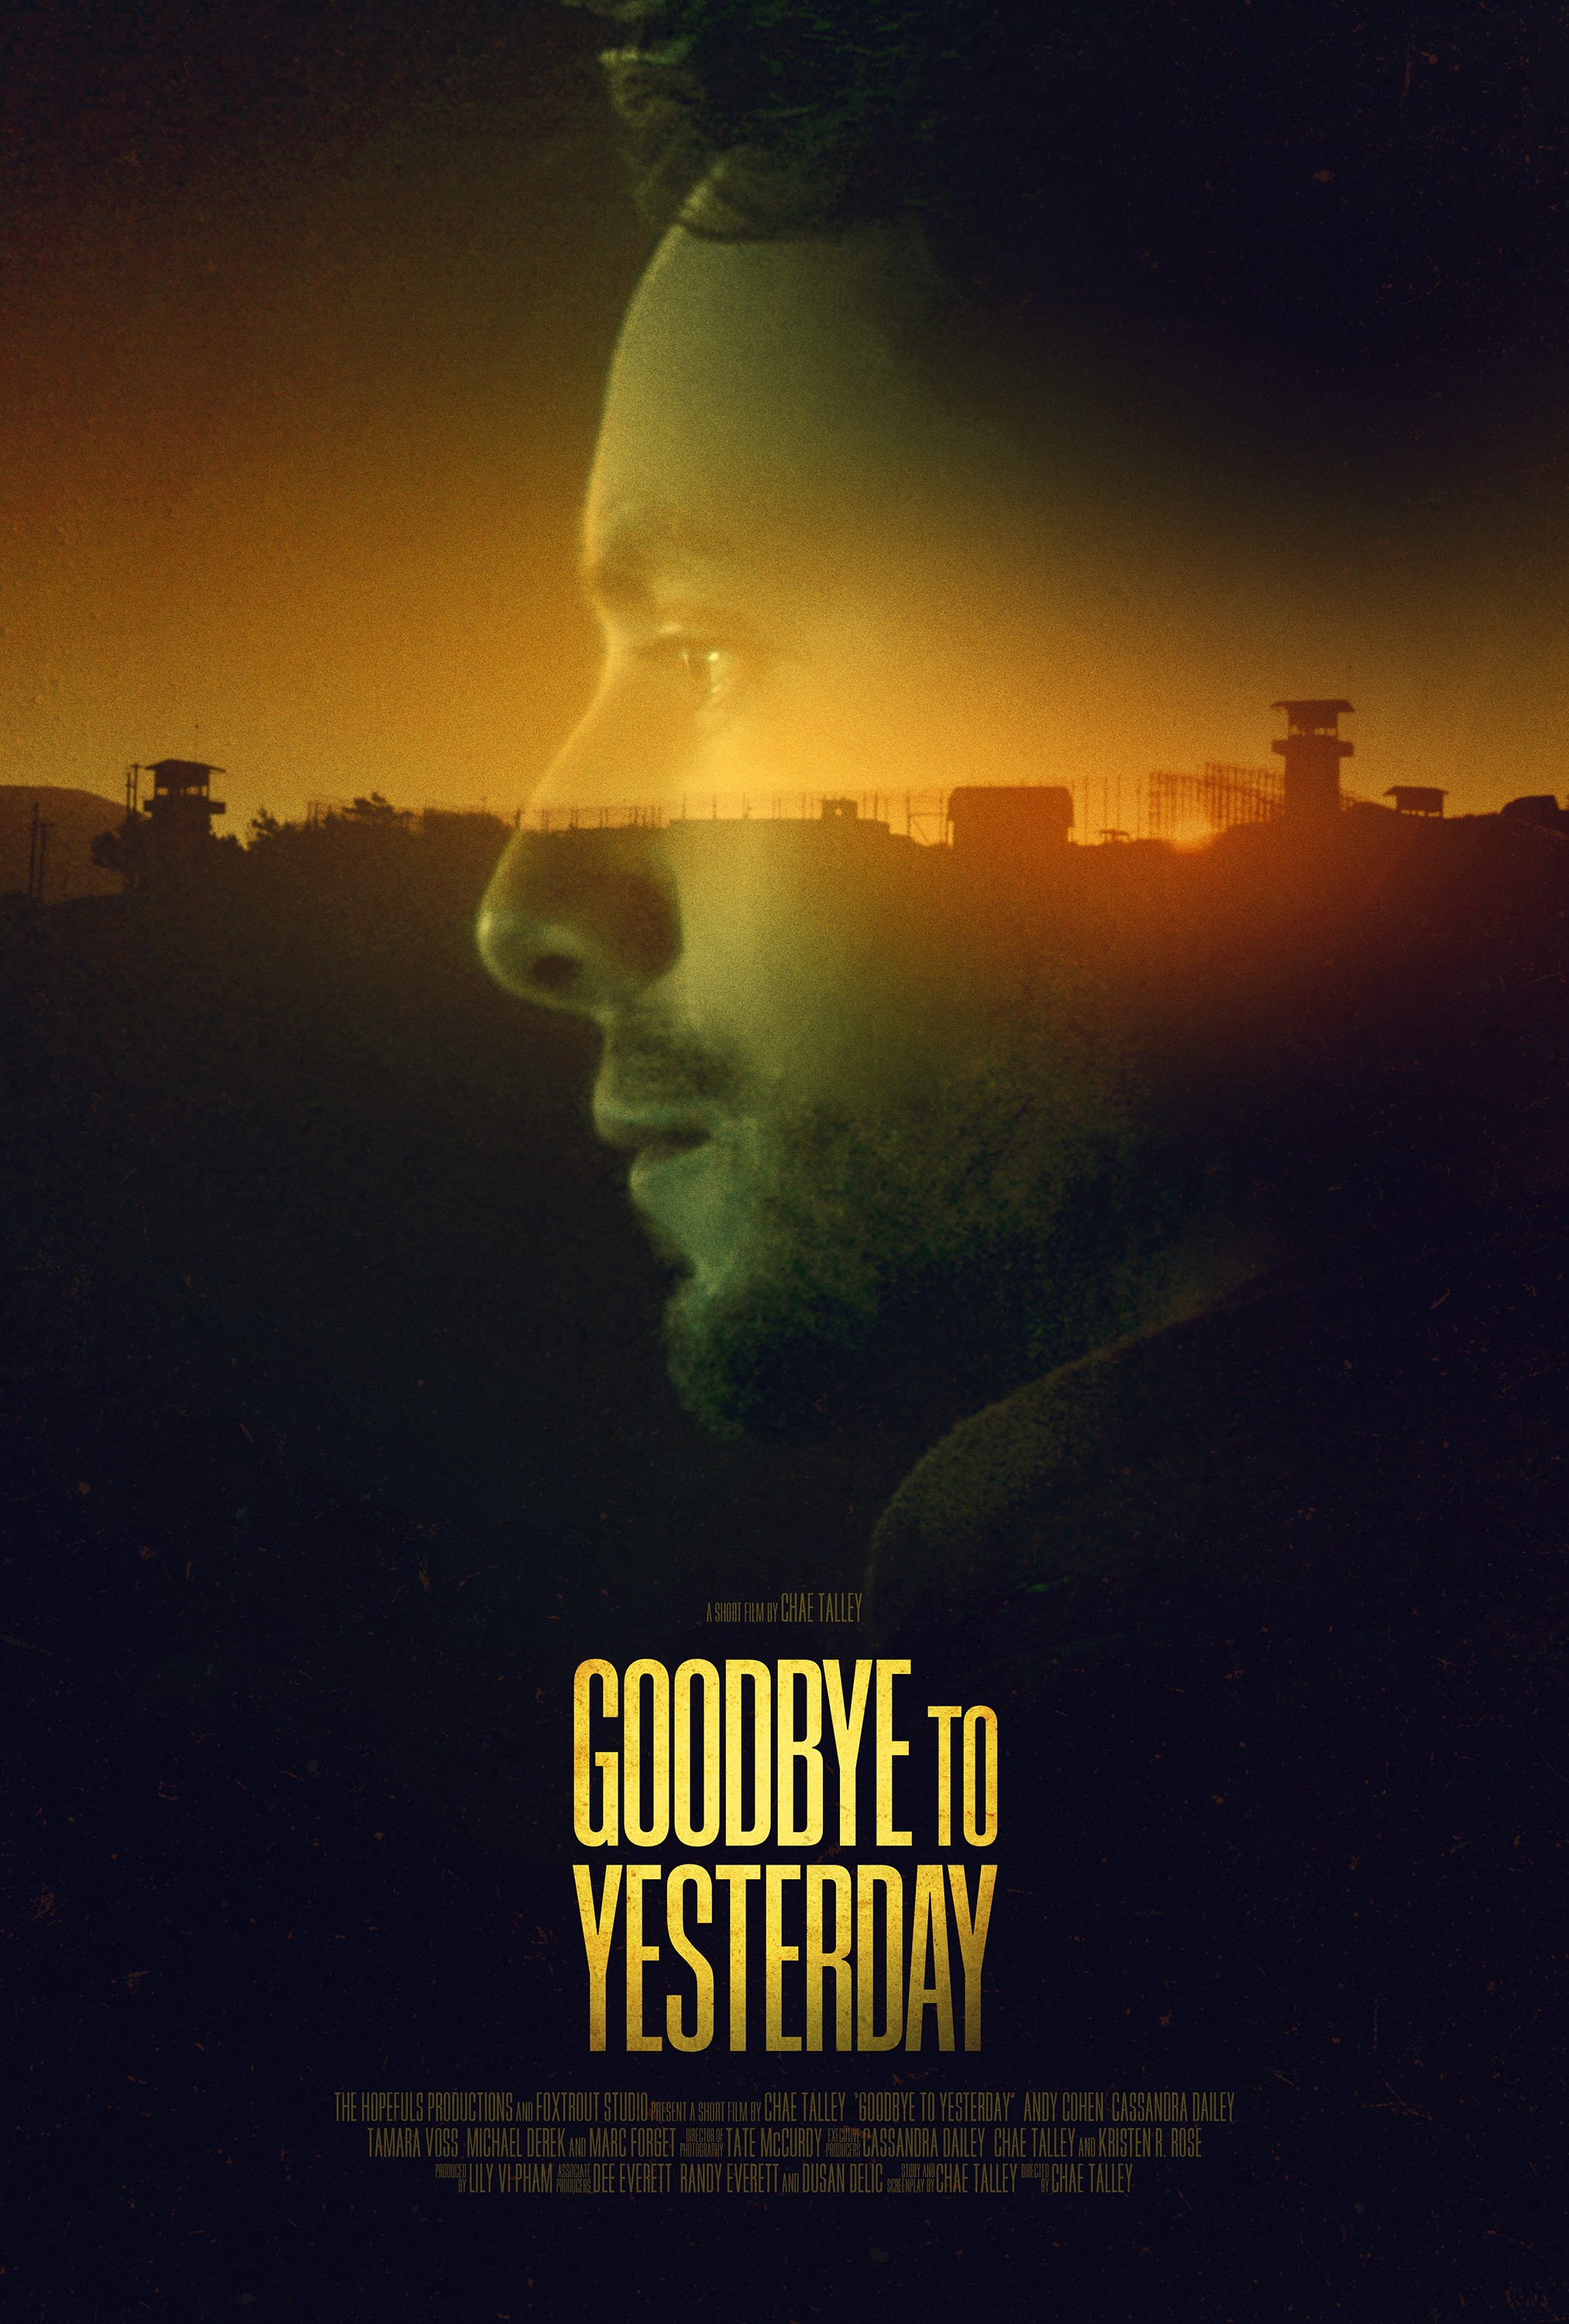 Mega Sized Movie Poster Image for Goodbye to Yesterday